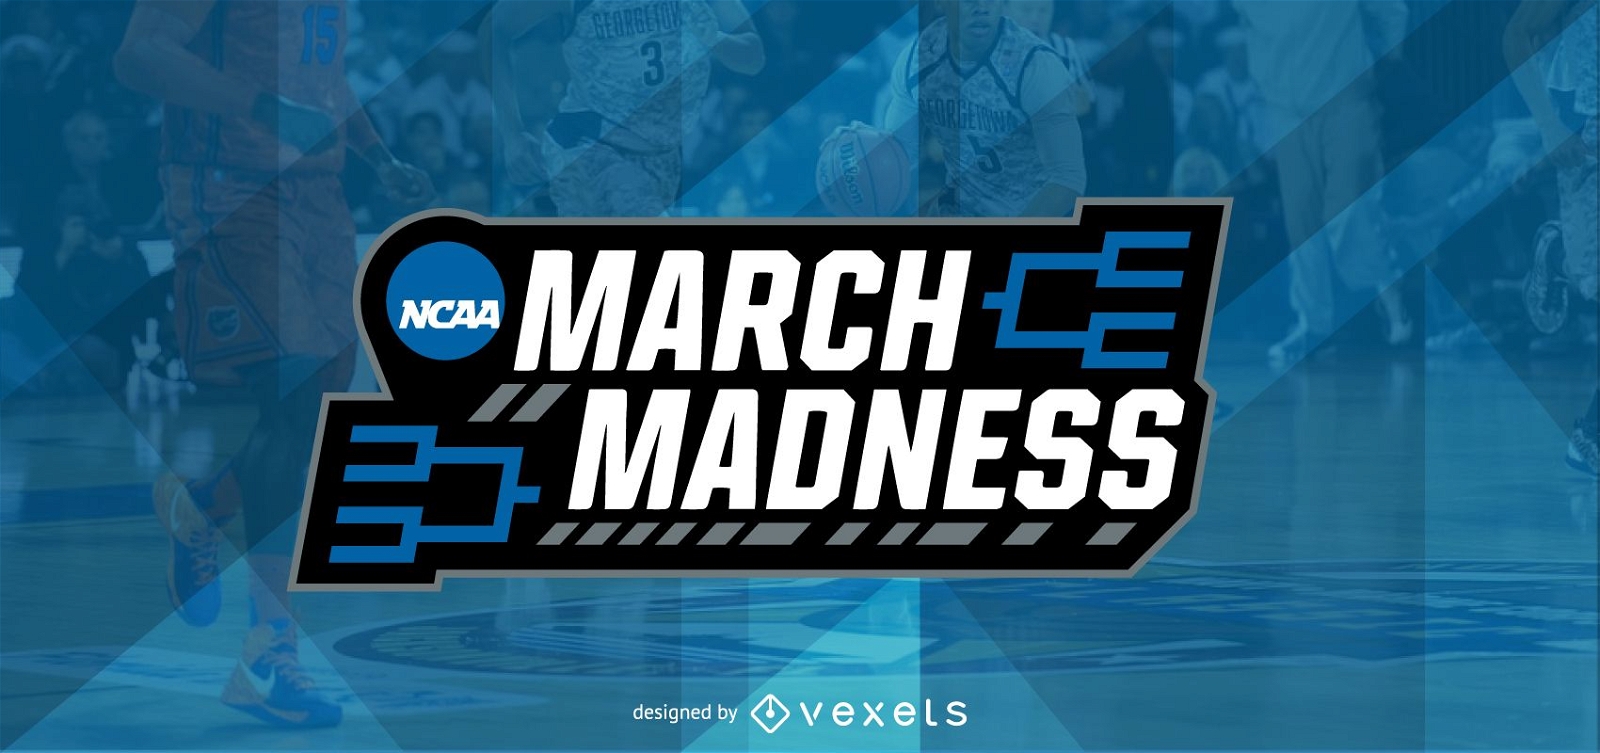 March Madness article header